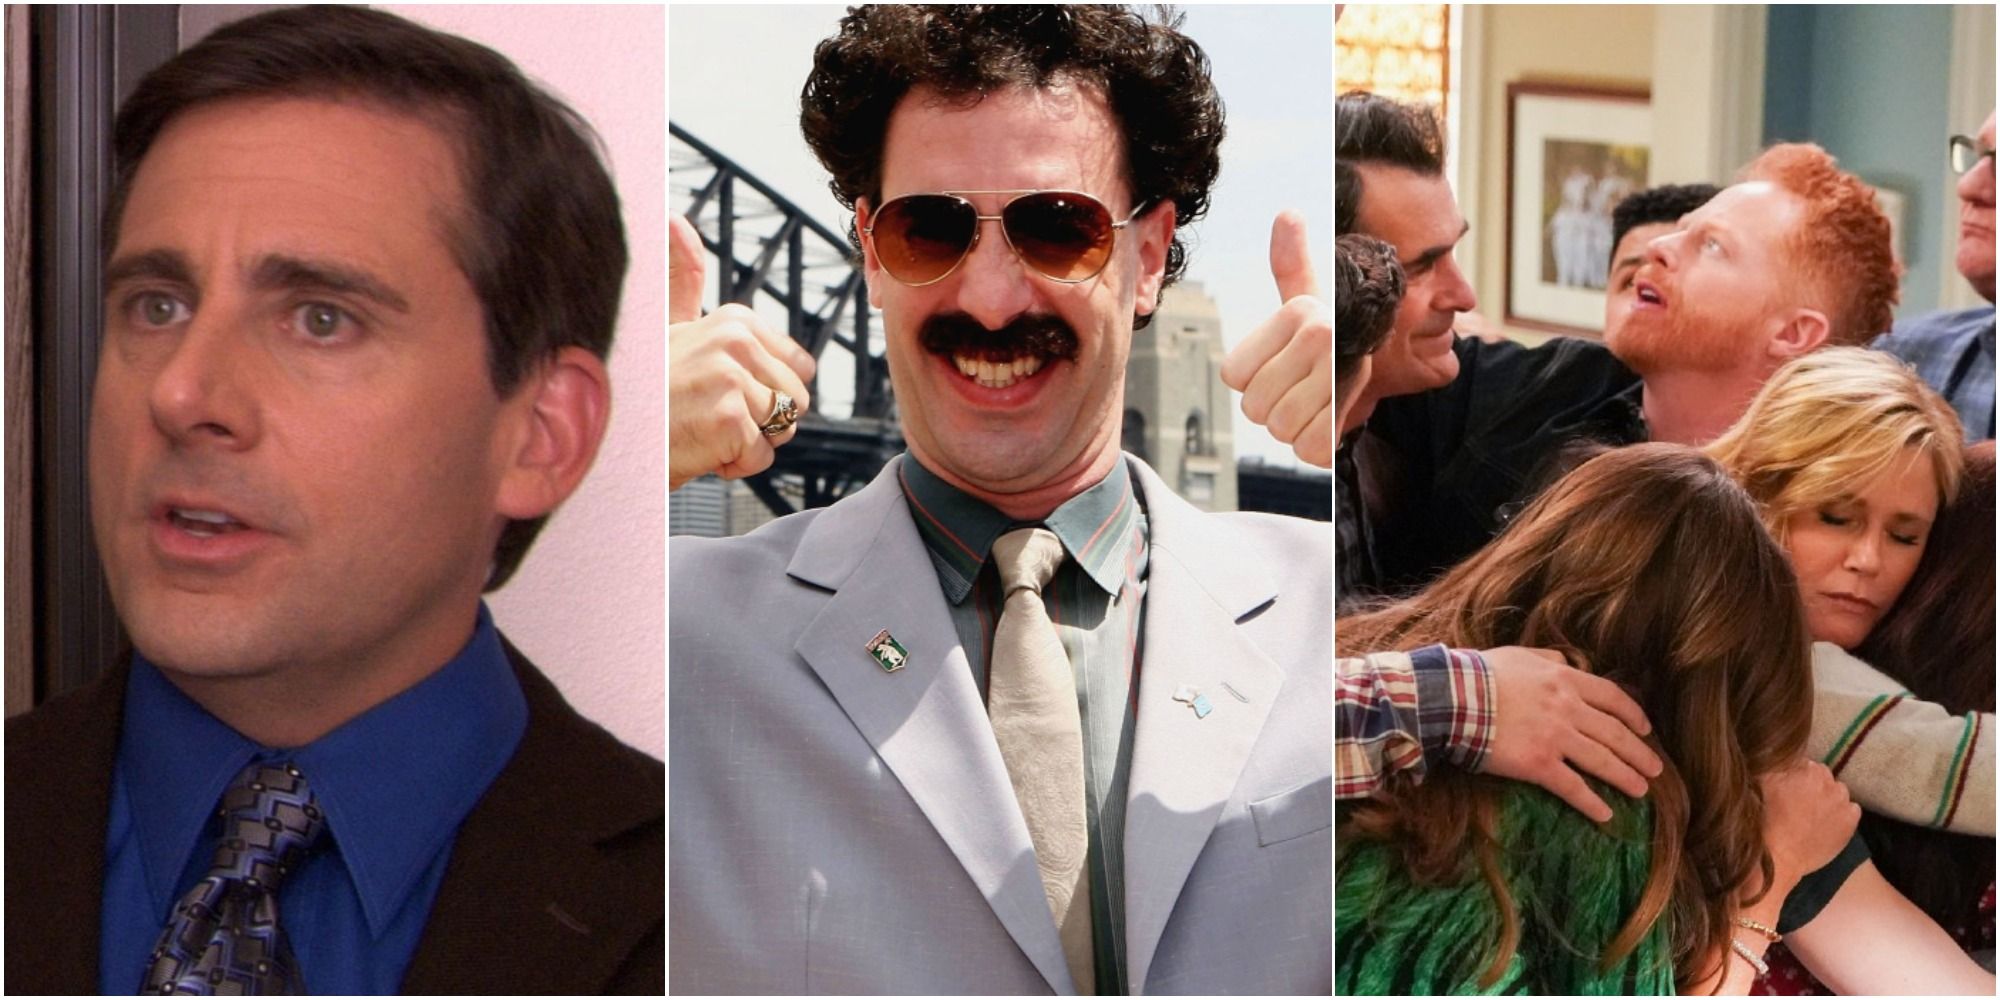 stills from The Office, Borat, and Modern Family